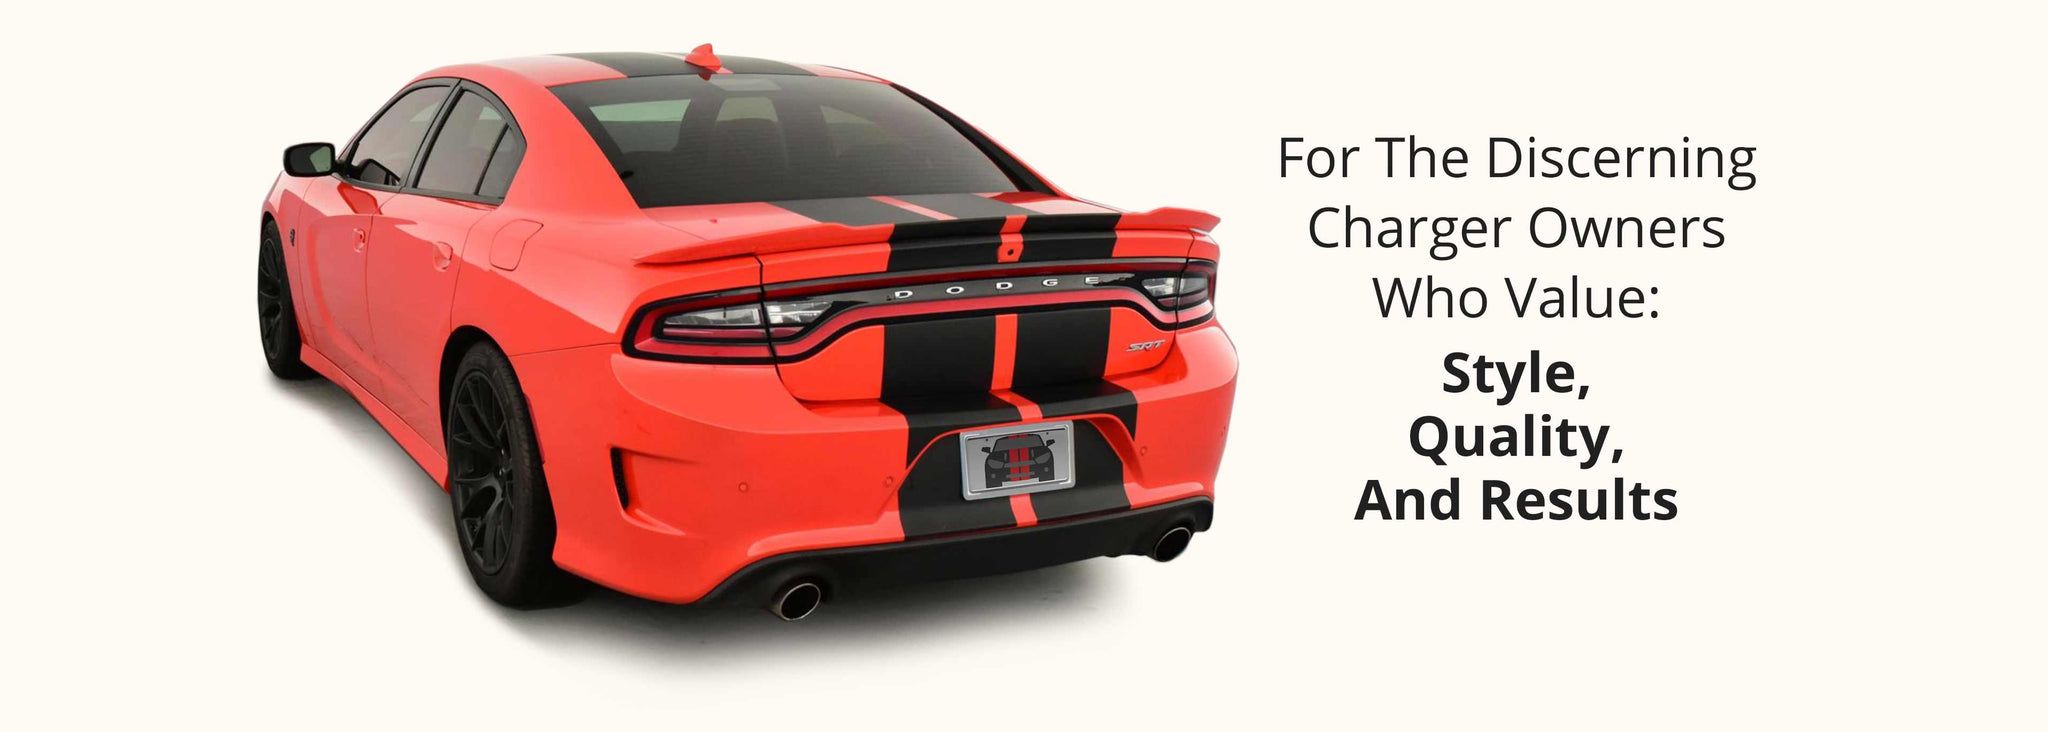 Dodge Charger Hellcat Racing Stripes with Optional Pinstriping (Twin Rally Stripes, 2015-2022) - Stripe Source